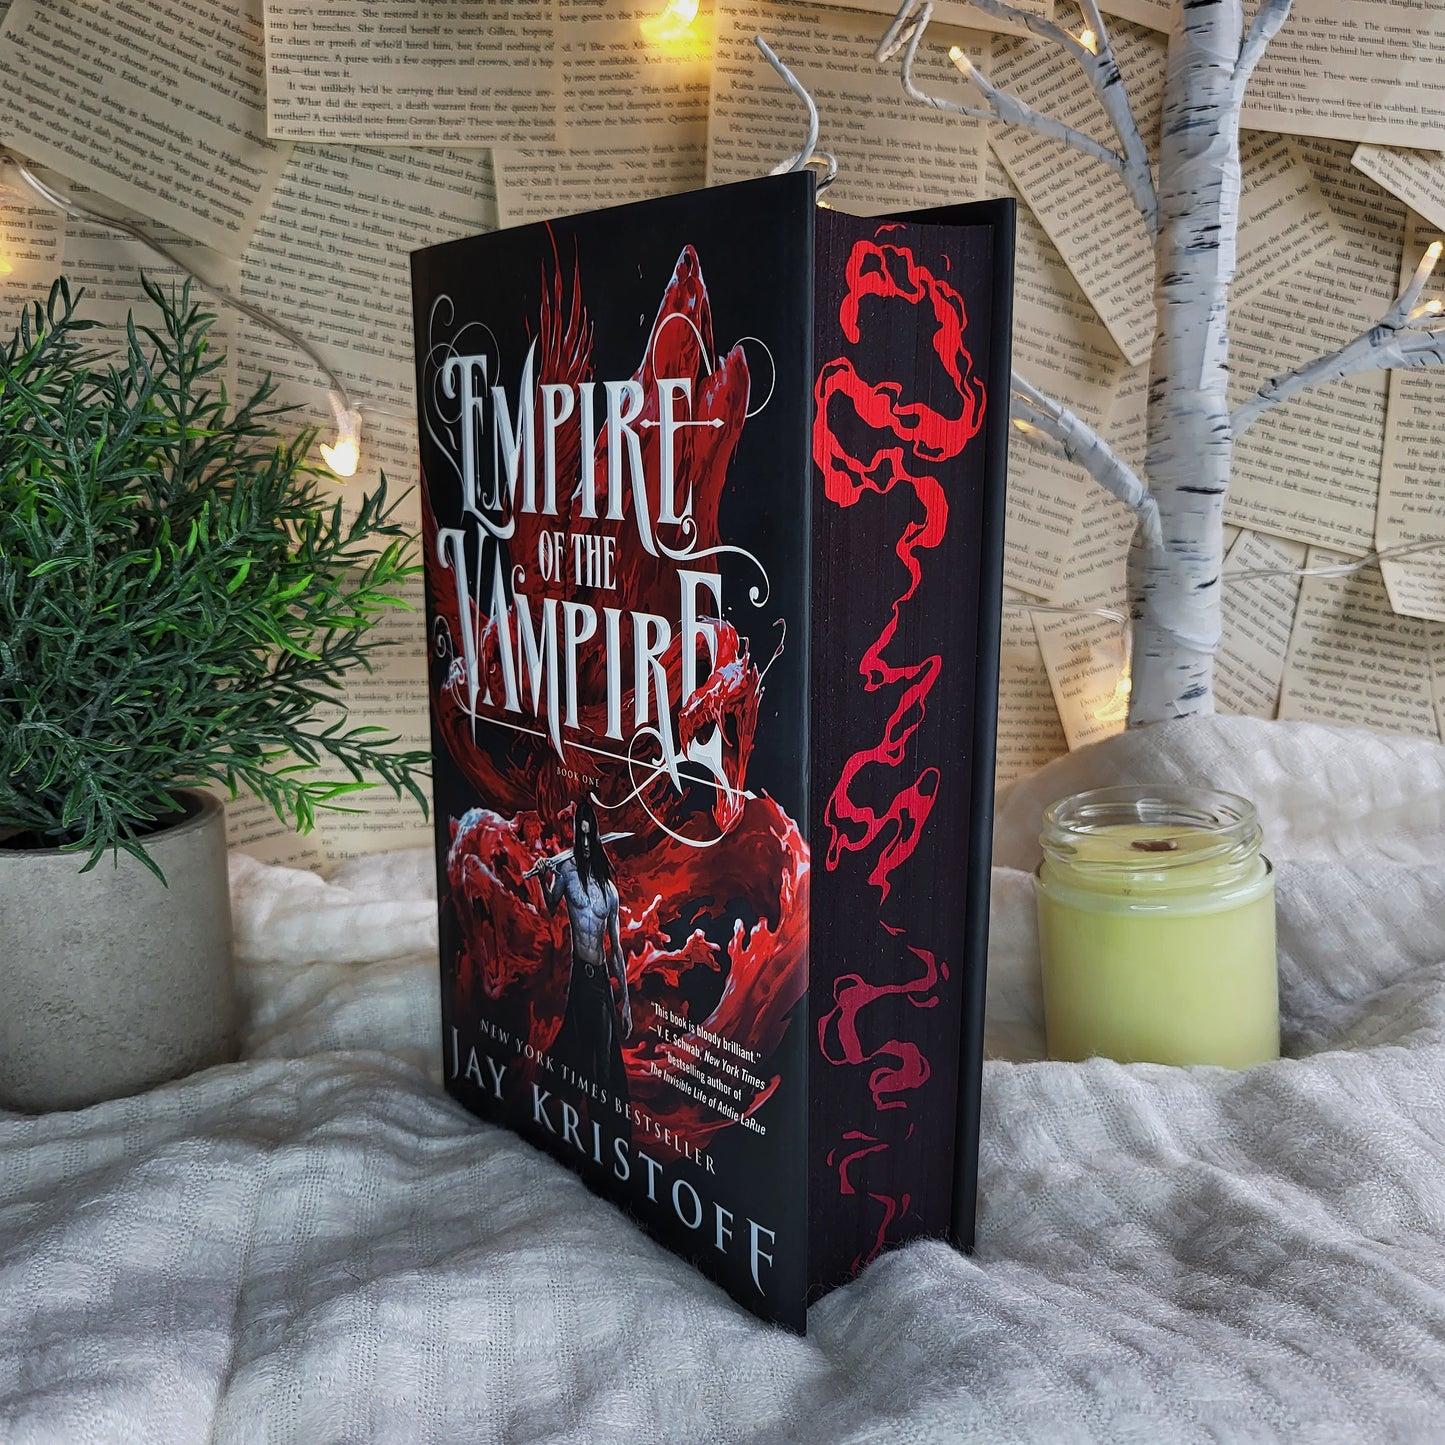 Empire of the Vampire/ Empire of the Damned